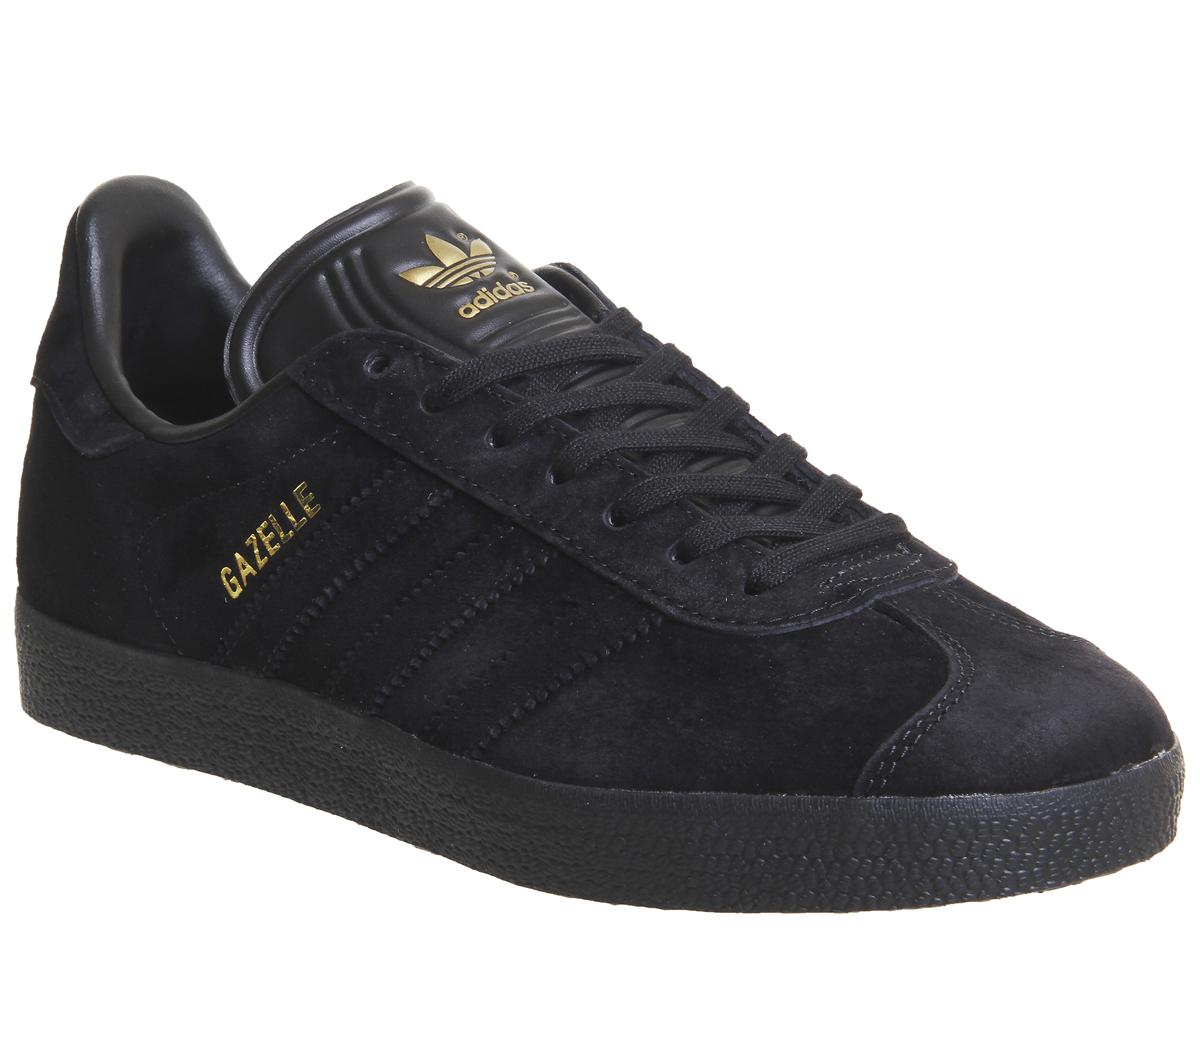 adidas Gazelle Trainers Black Gold Exclusive - His trainers